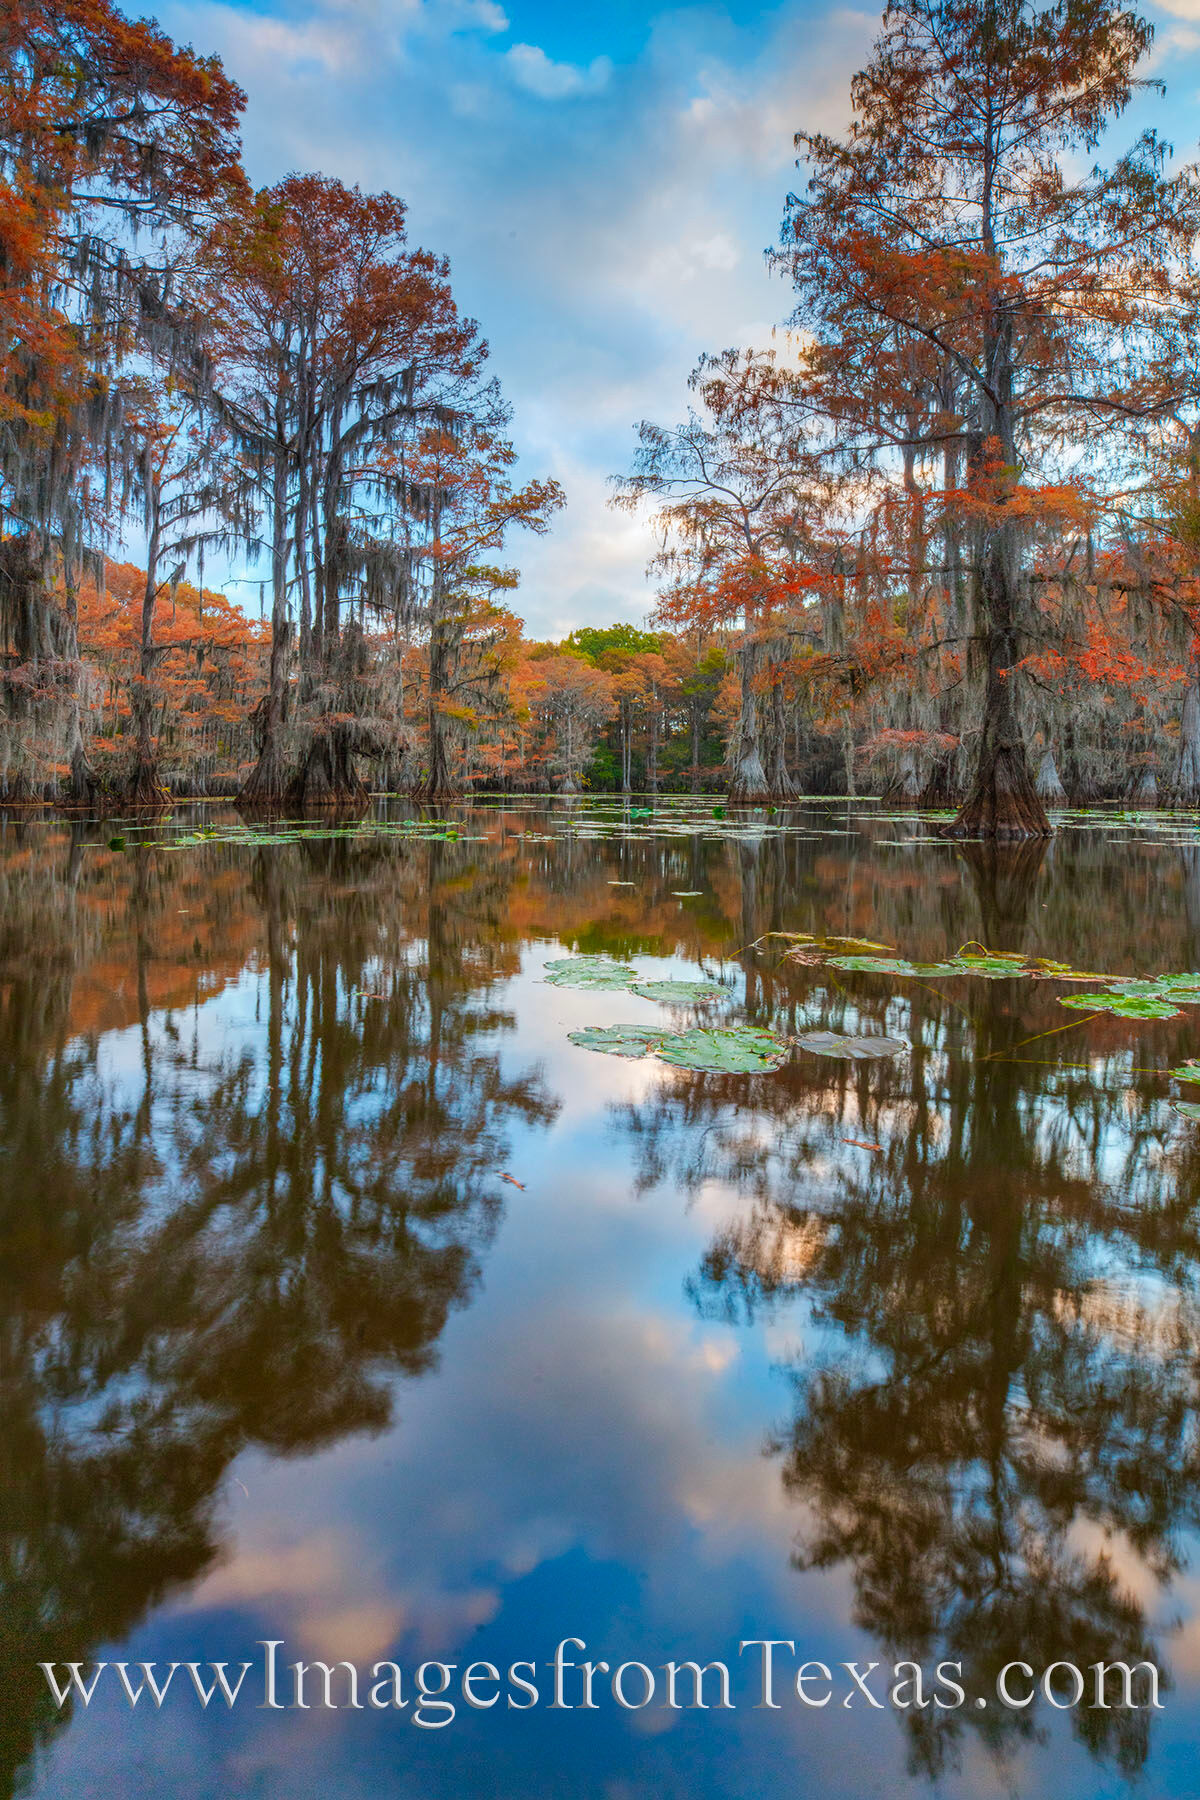 Clouds raced overhead on this colorful Fall morning at Caddo Lake. Seen here from Mill Pond in the state park, the cypress trees...